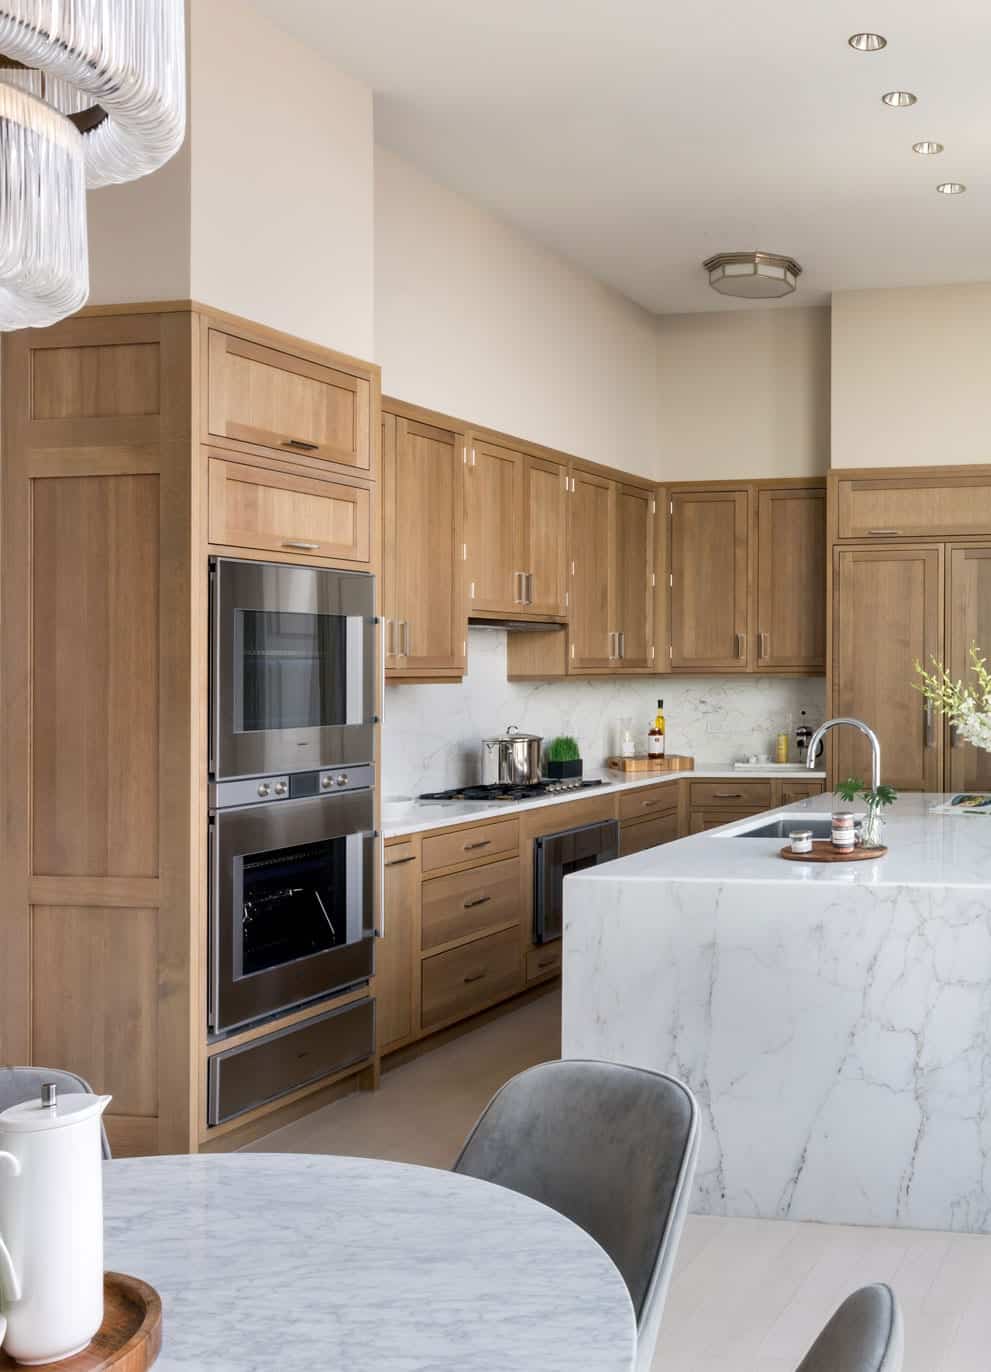 Multi-unit residential kitchen features Bilotta Collection cabinets in rift cut white oak and island with marble waterfall countertop.